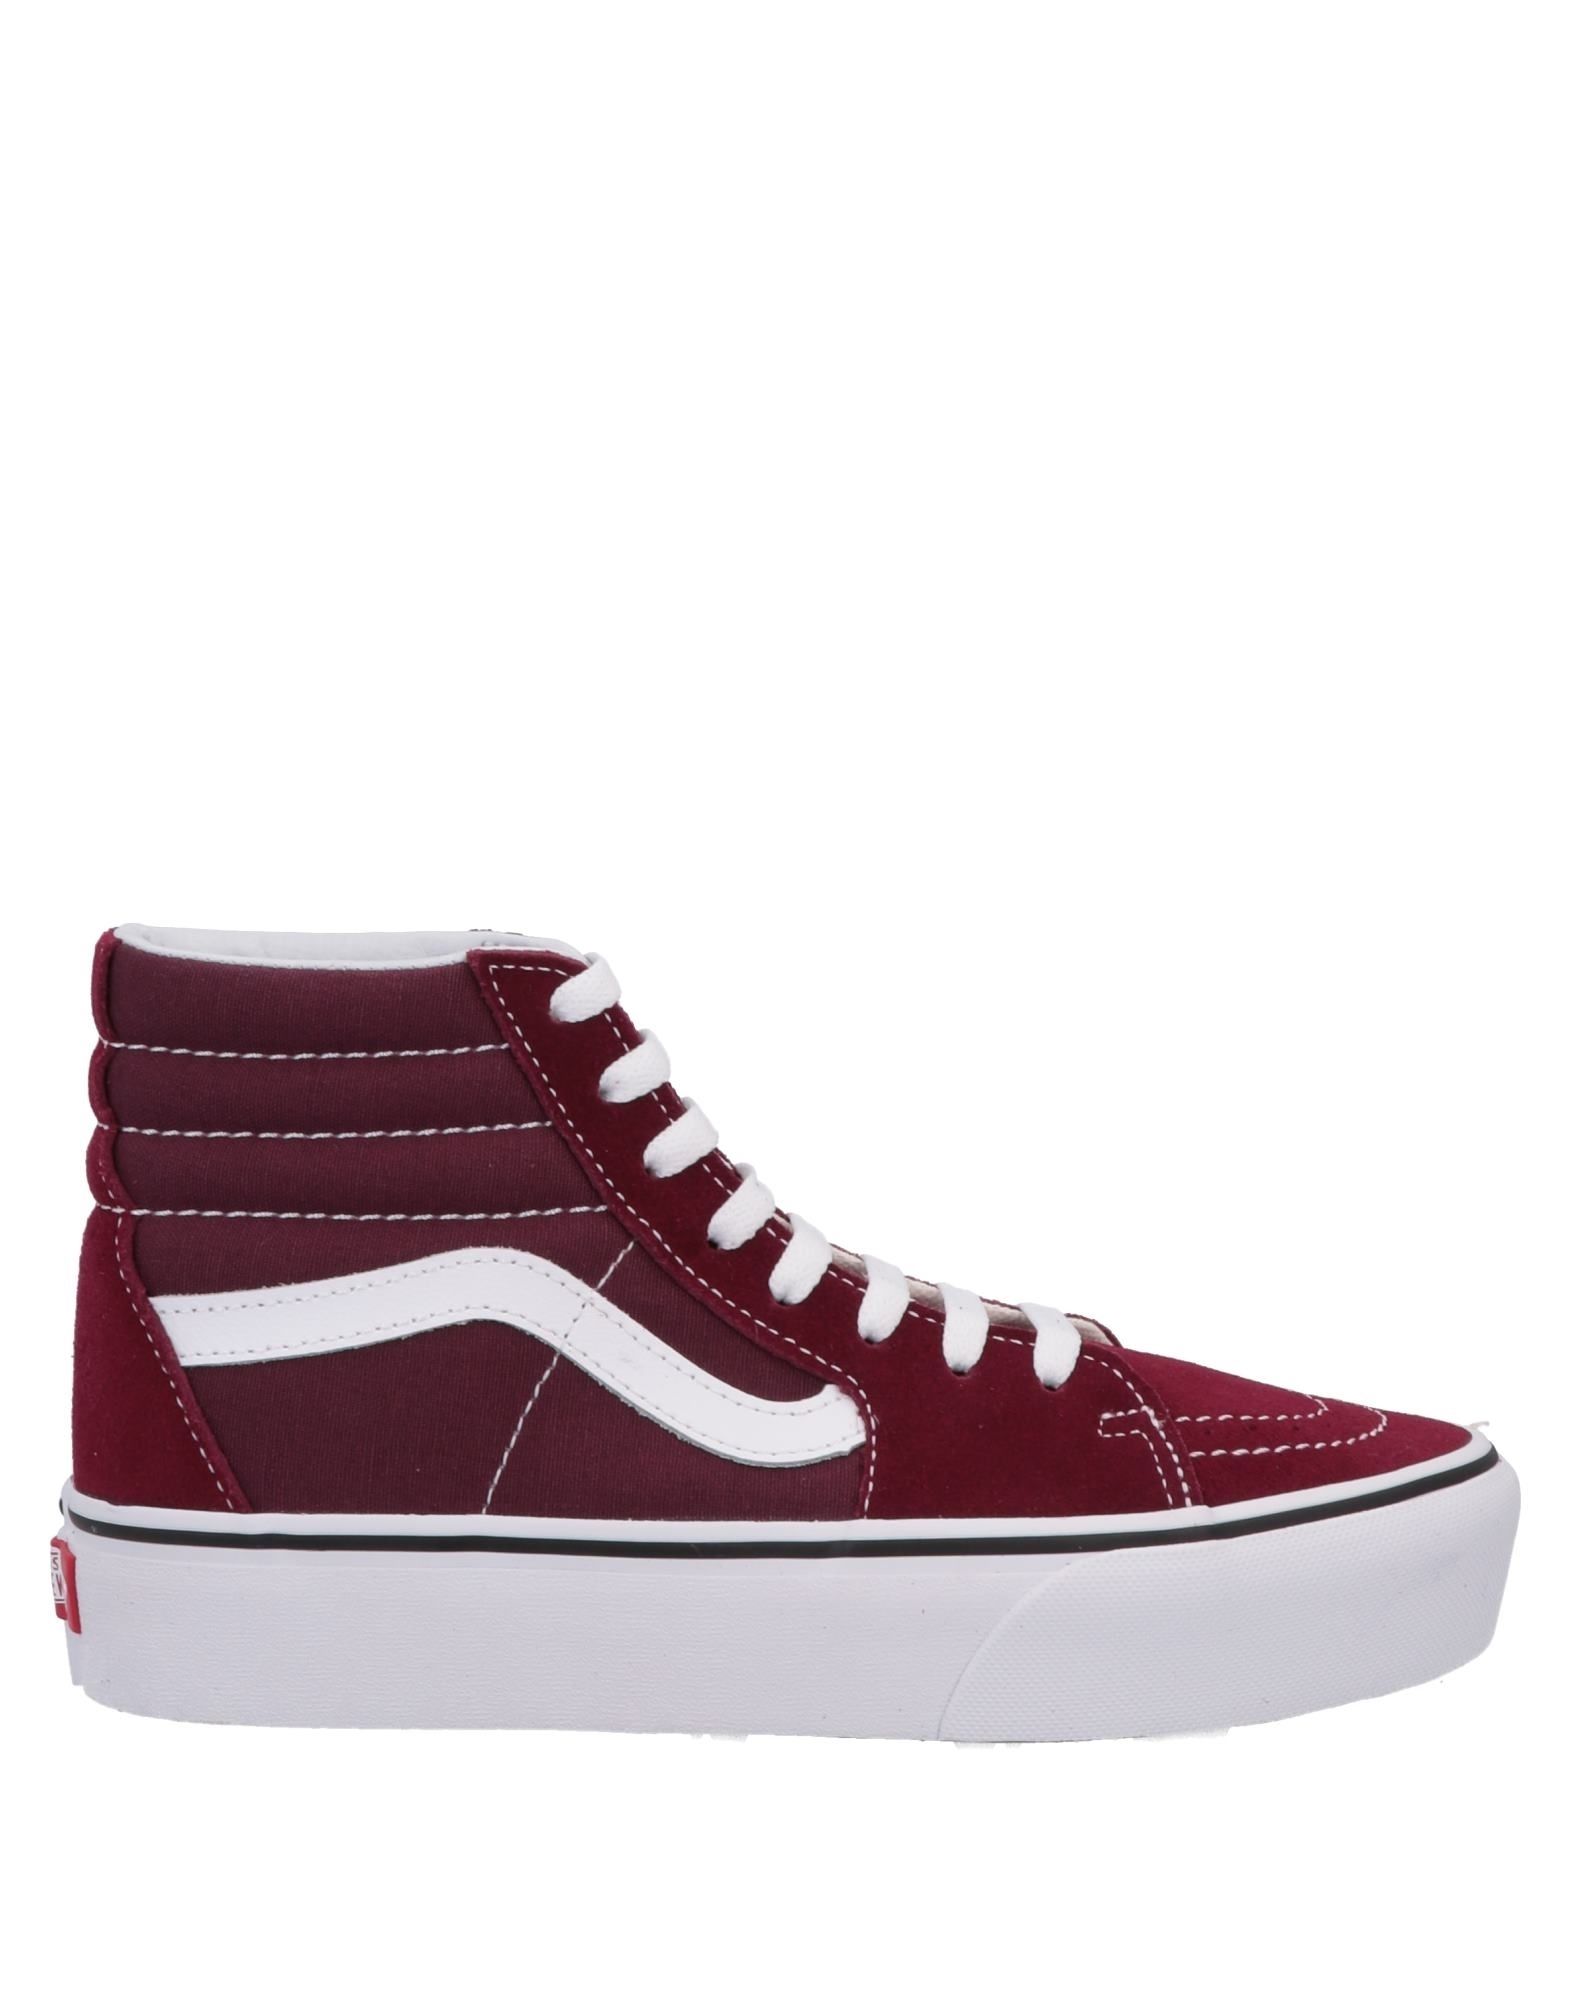 Shop Vans Woman Sneakers Burgundy Size 6 Soft Leather, Textile Fibers In Red